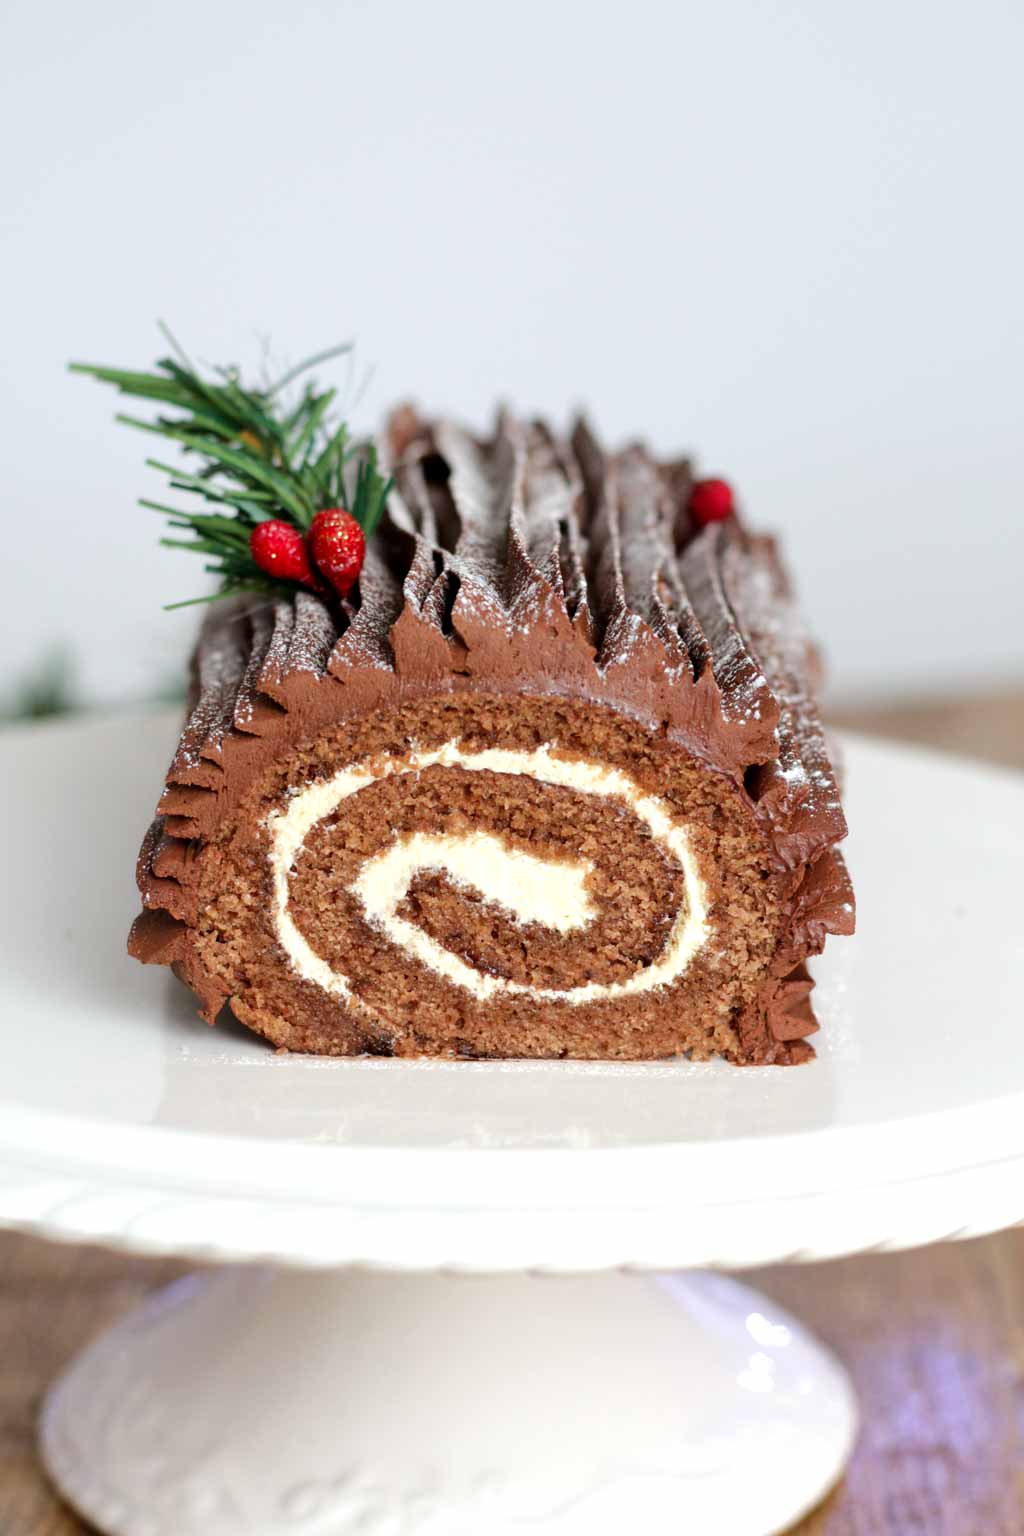 a vegan chocolate yule log on a white cake stand, decorated with cranberries and greenery on top. seen from the front with the rolled layers of the yule log clearly visible. the log is chocolate cake filled with a white vegan buttercream